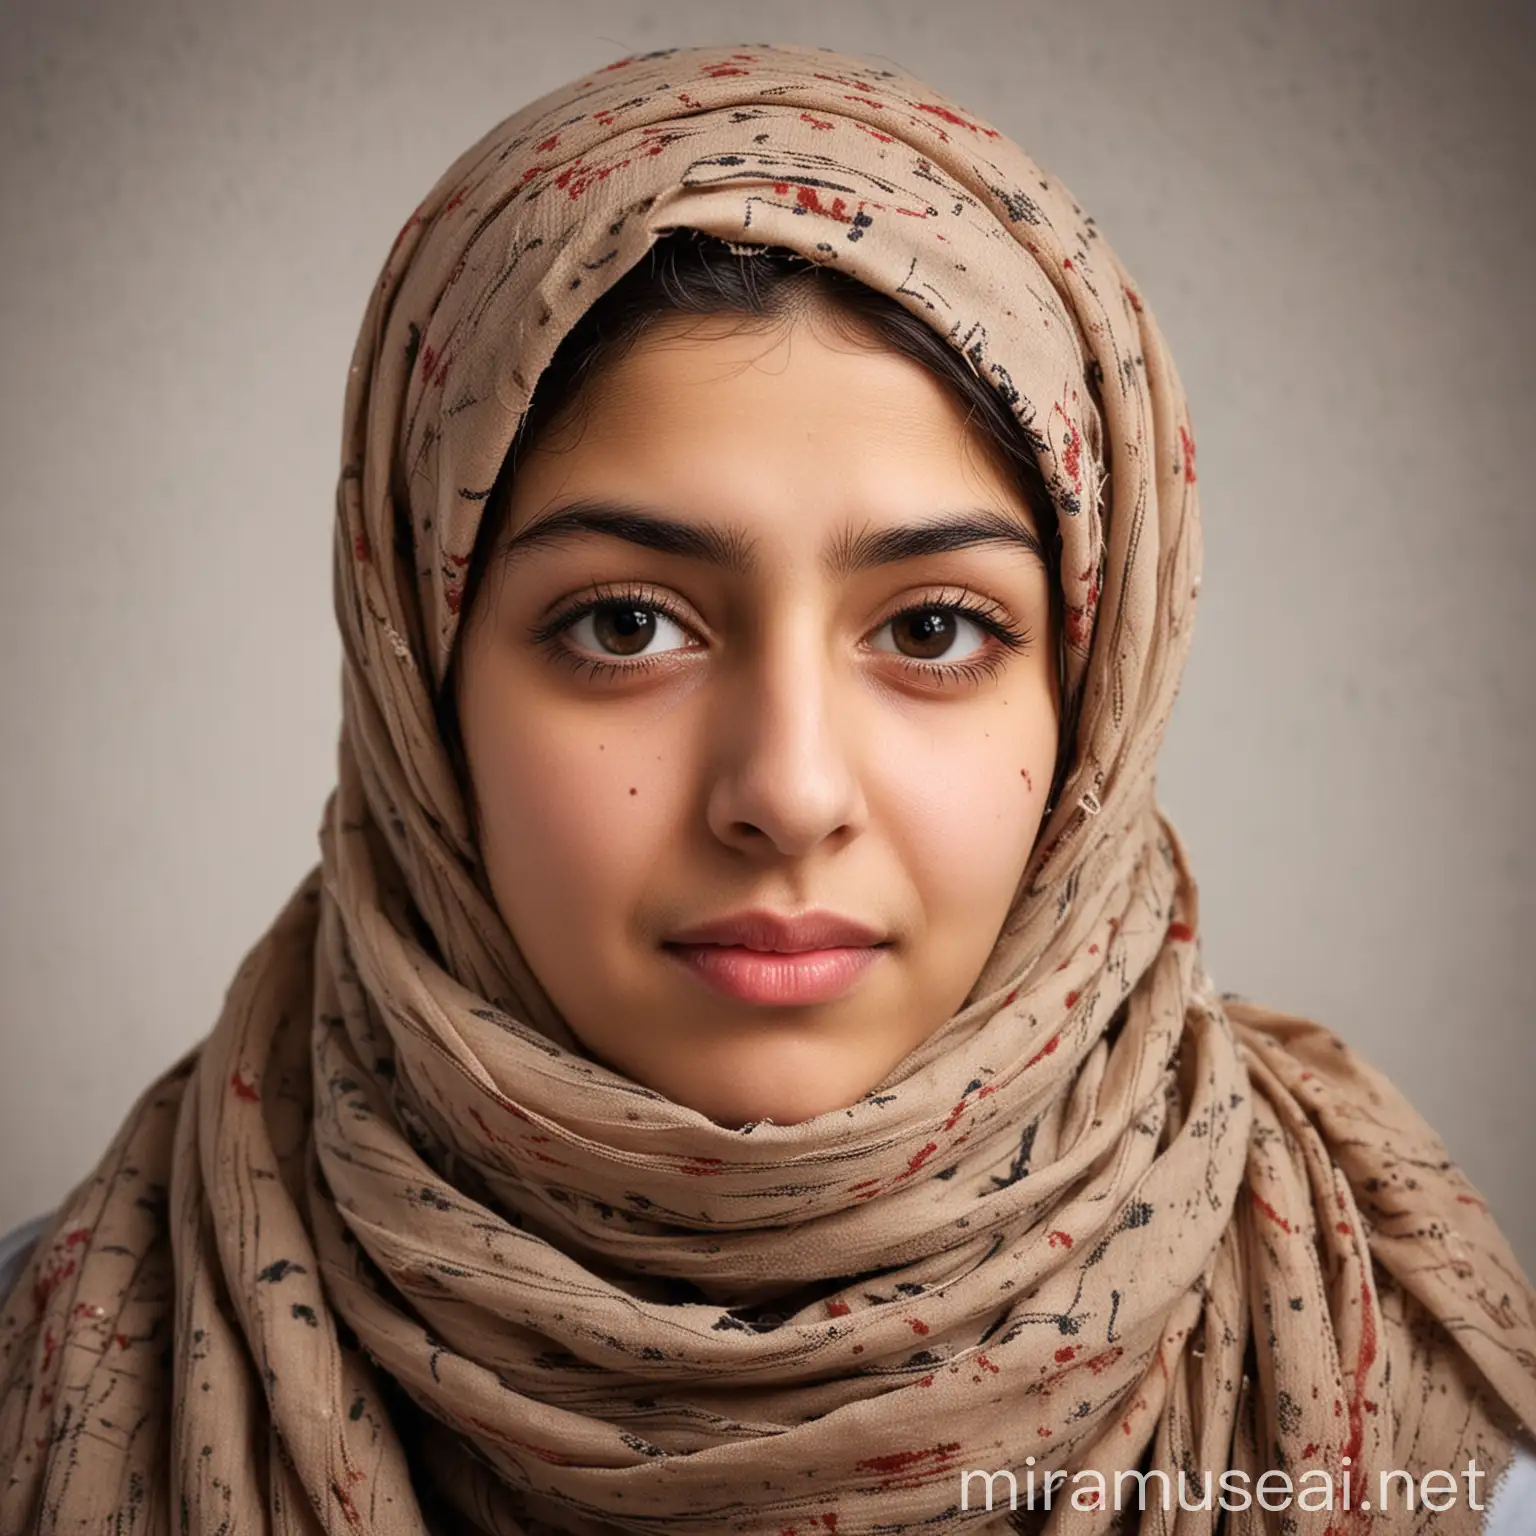 A 20 year old woman from Bahrain with head covered with scarf and is overly neurotic